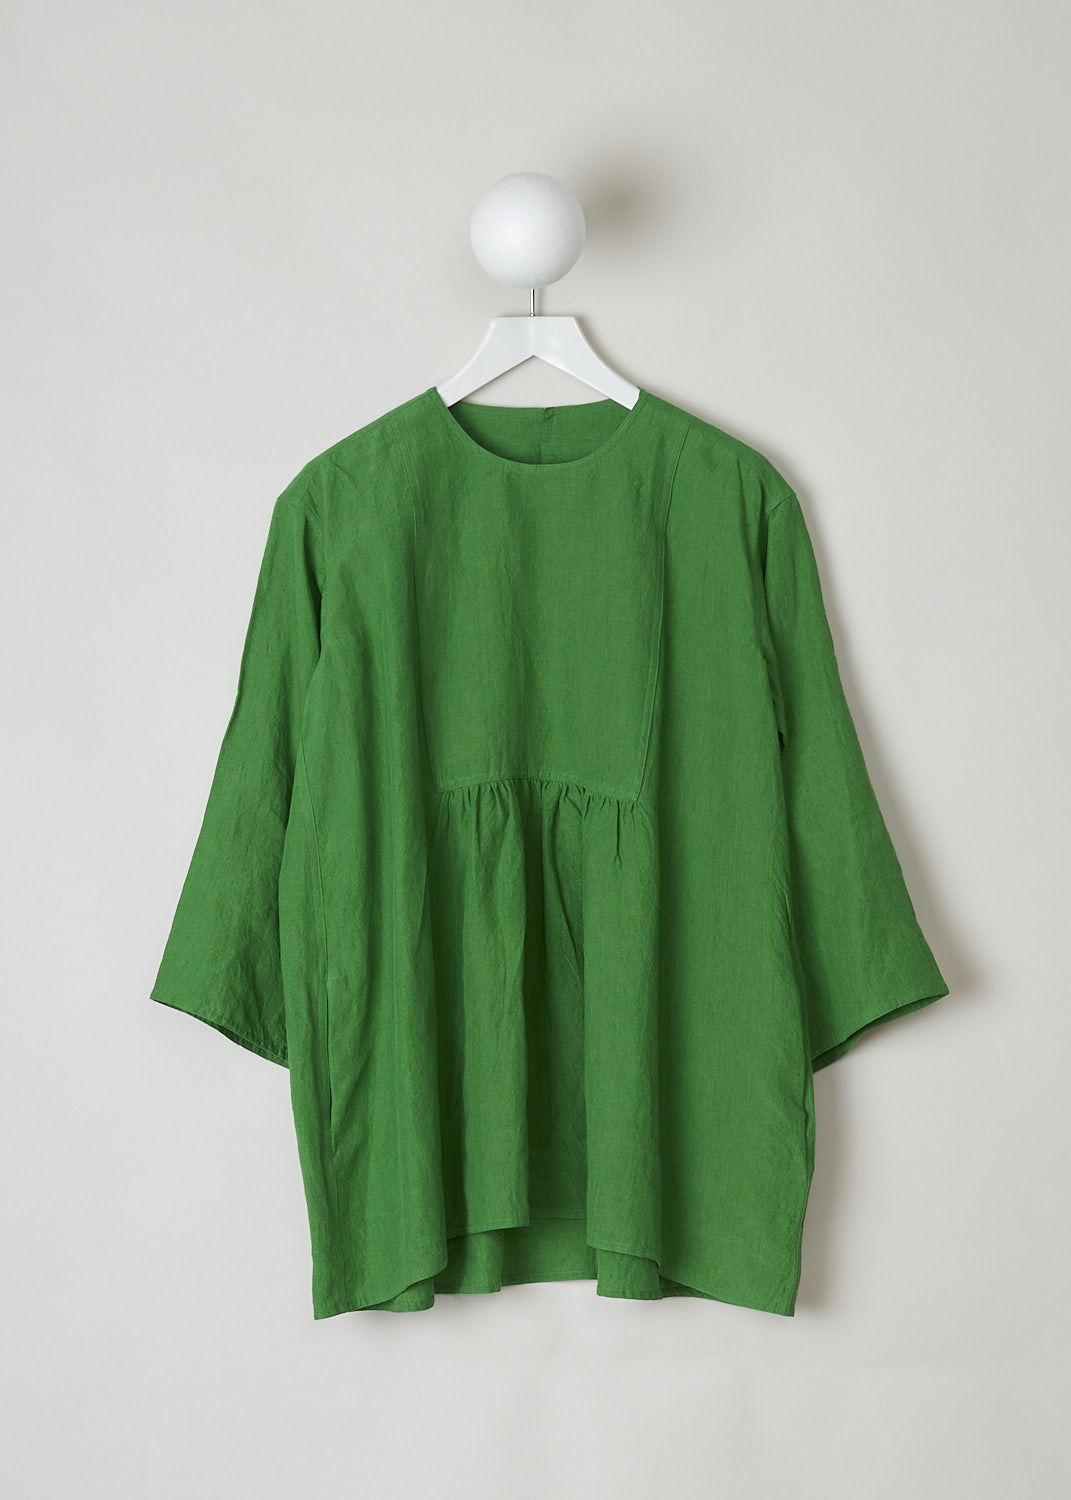 SOFIE Dâ€™HOORE, BRIGHT GREEN BINETTE TOP, BINETTE_LIFE_GRASS, Green, Front, This oversized bright green top features a round neckline, dropped shoulders and long sleeves. The A-line top has a square bib-like front with pleated details below. Concealed in the side seams, slanted pockets can be found. The top has an asymmetrical finish, meaning the back is a little longer than the front. 

